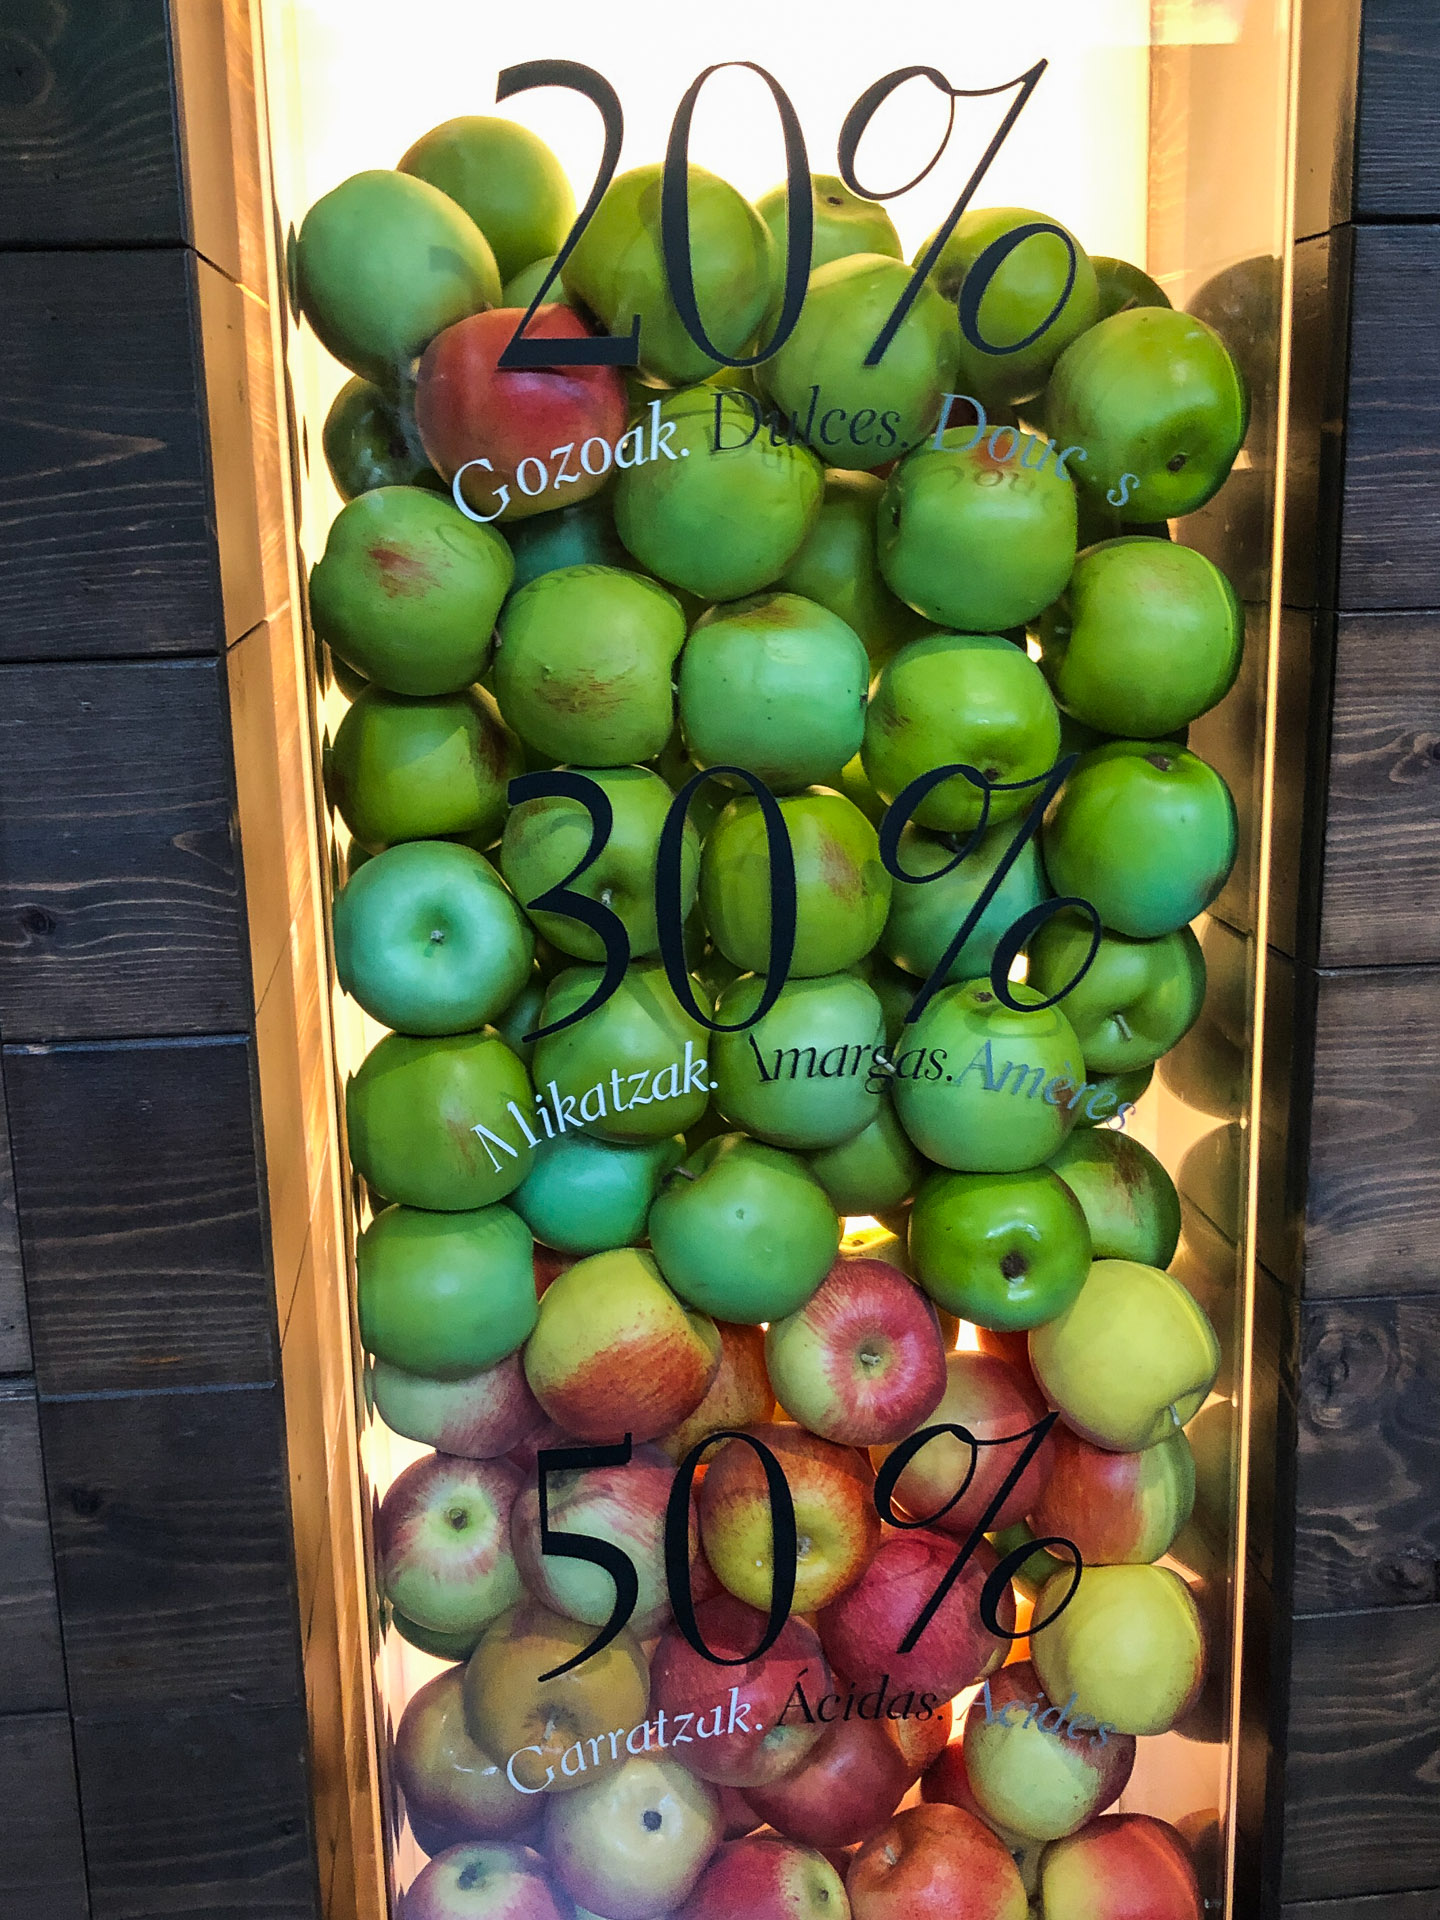 different apples used in Spanish cider